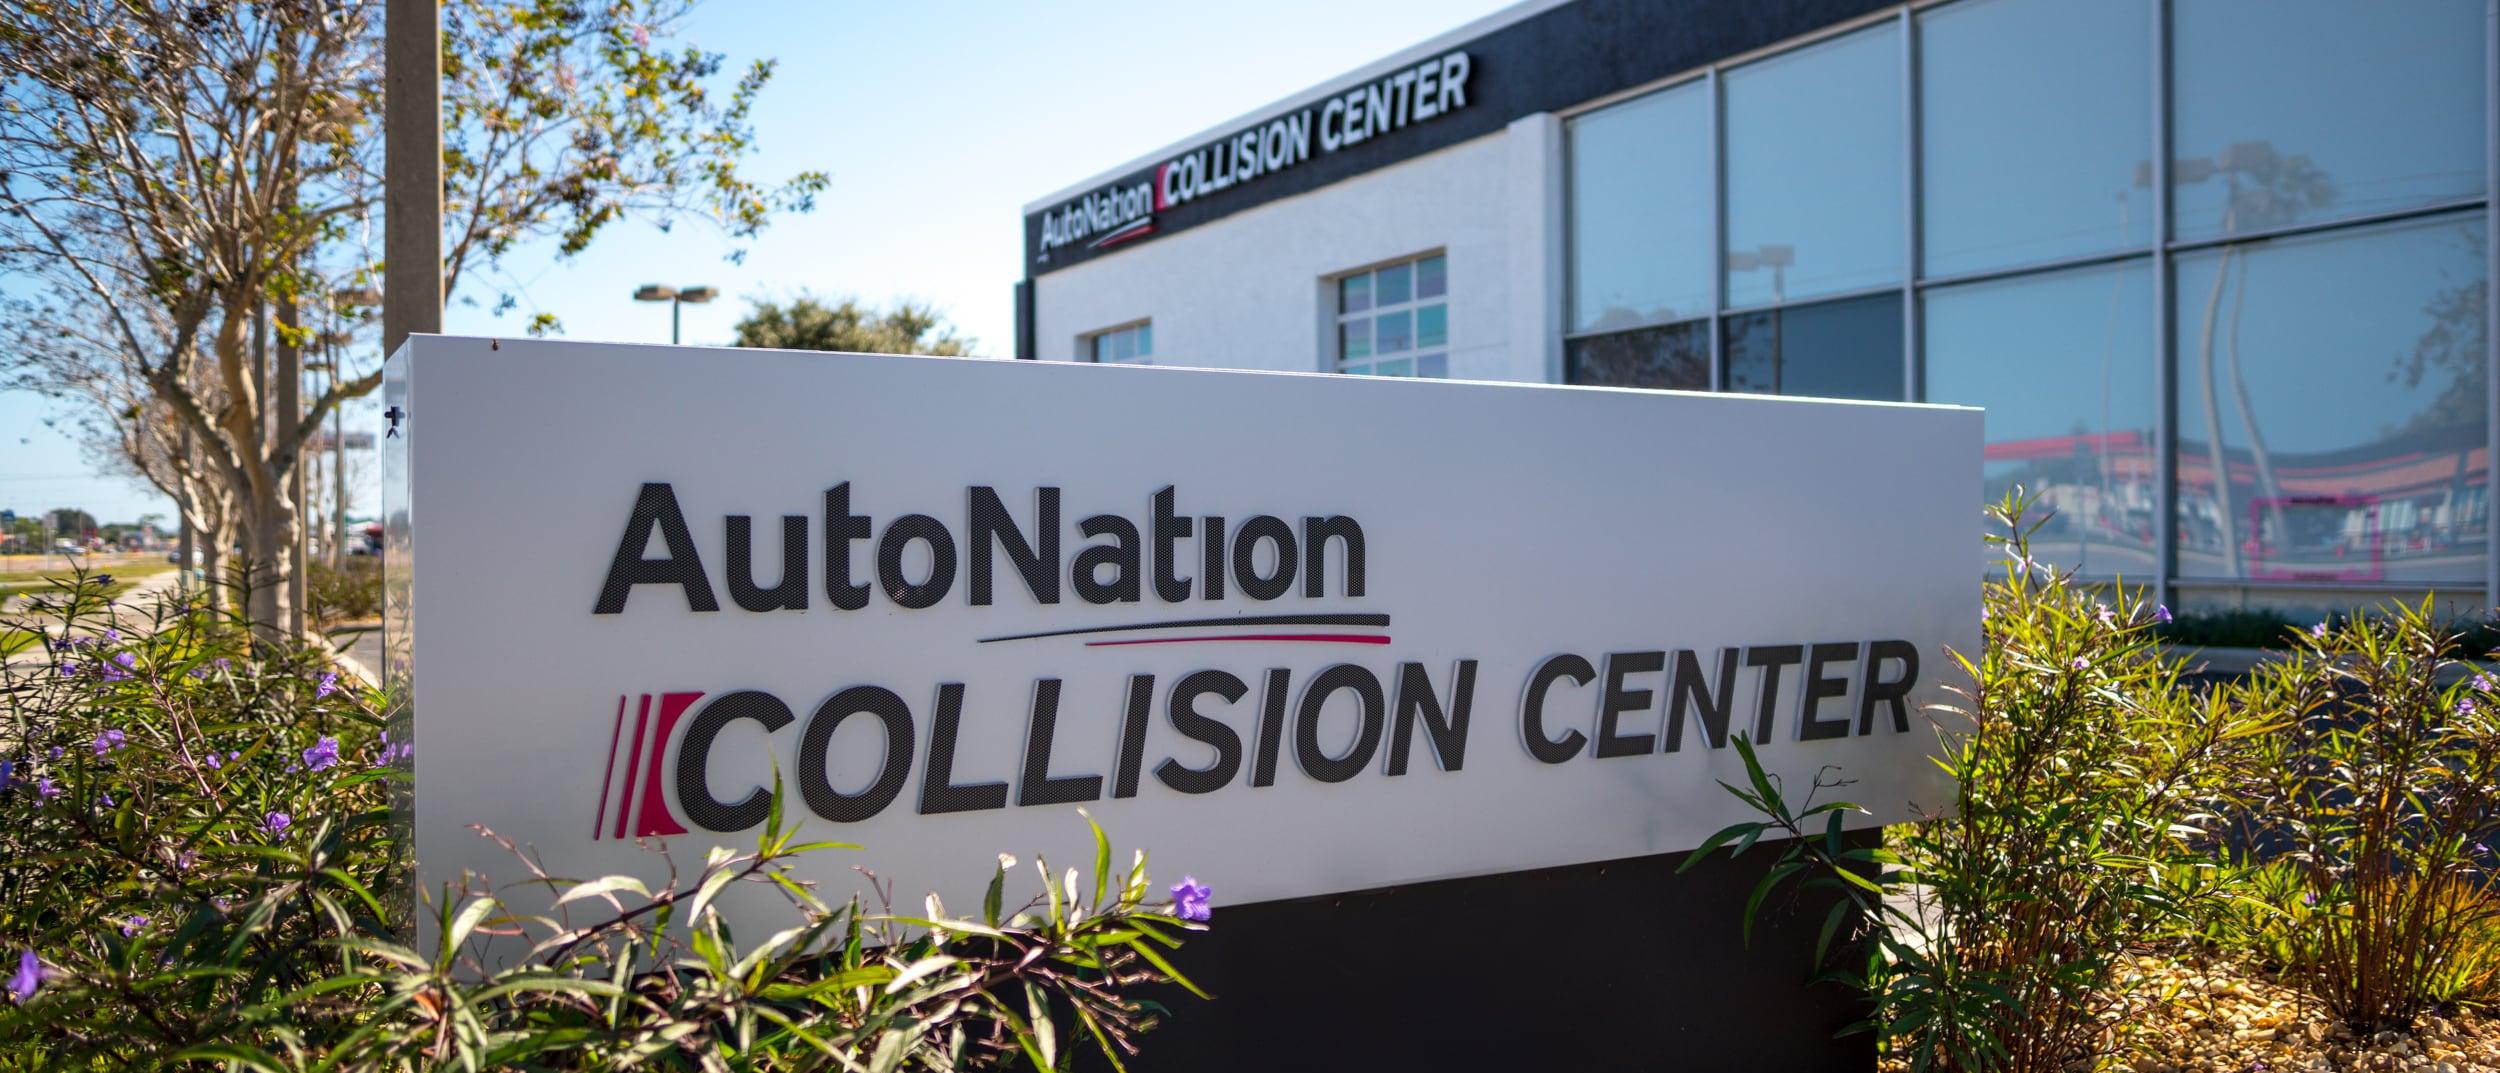 View of sign in front of AutoNation Collision Center at AutoNation Chevrolet Austin